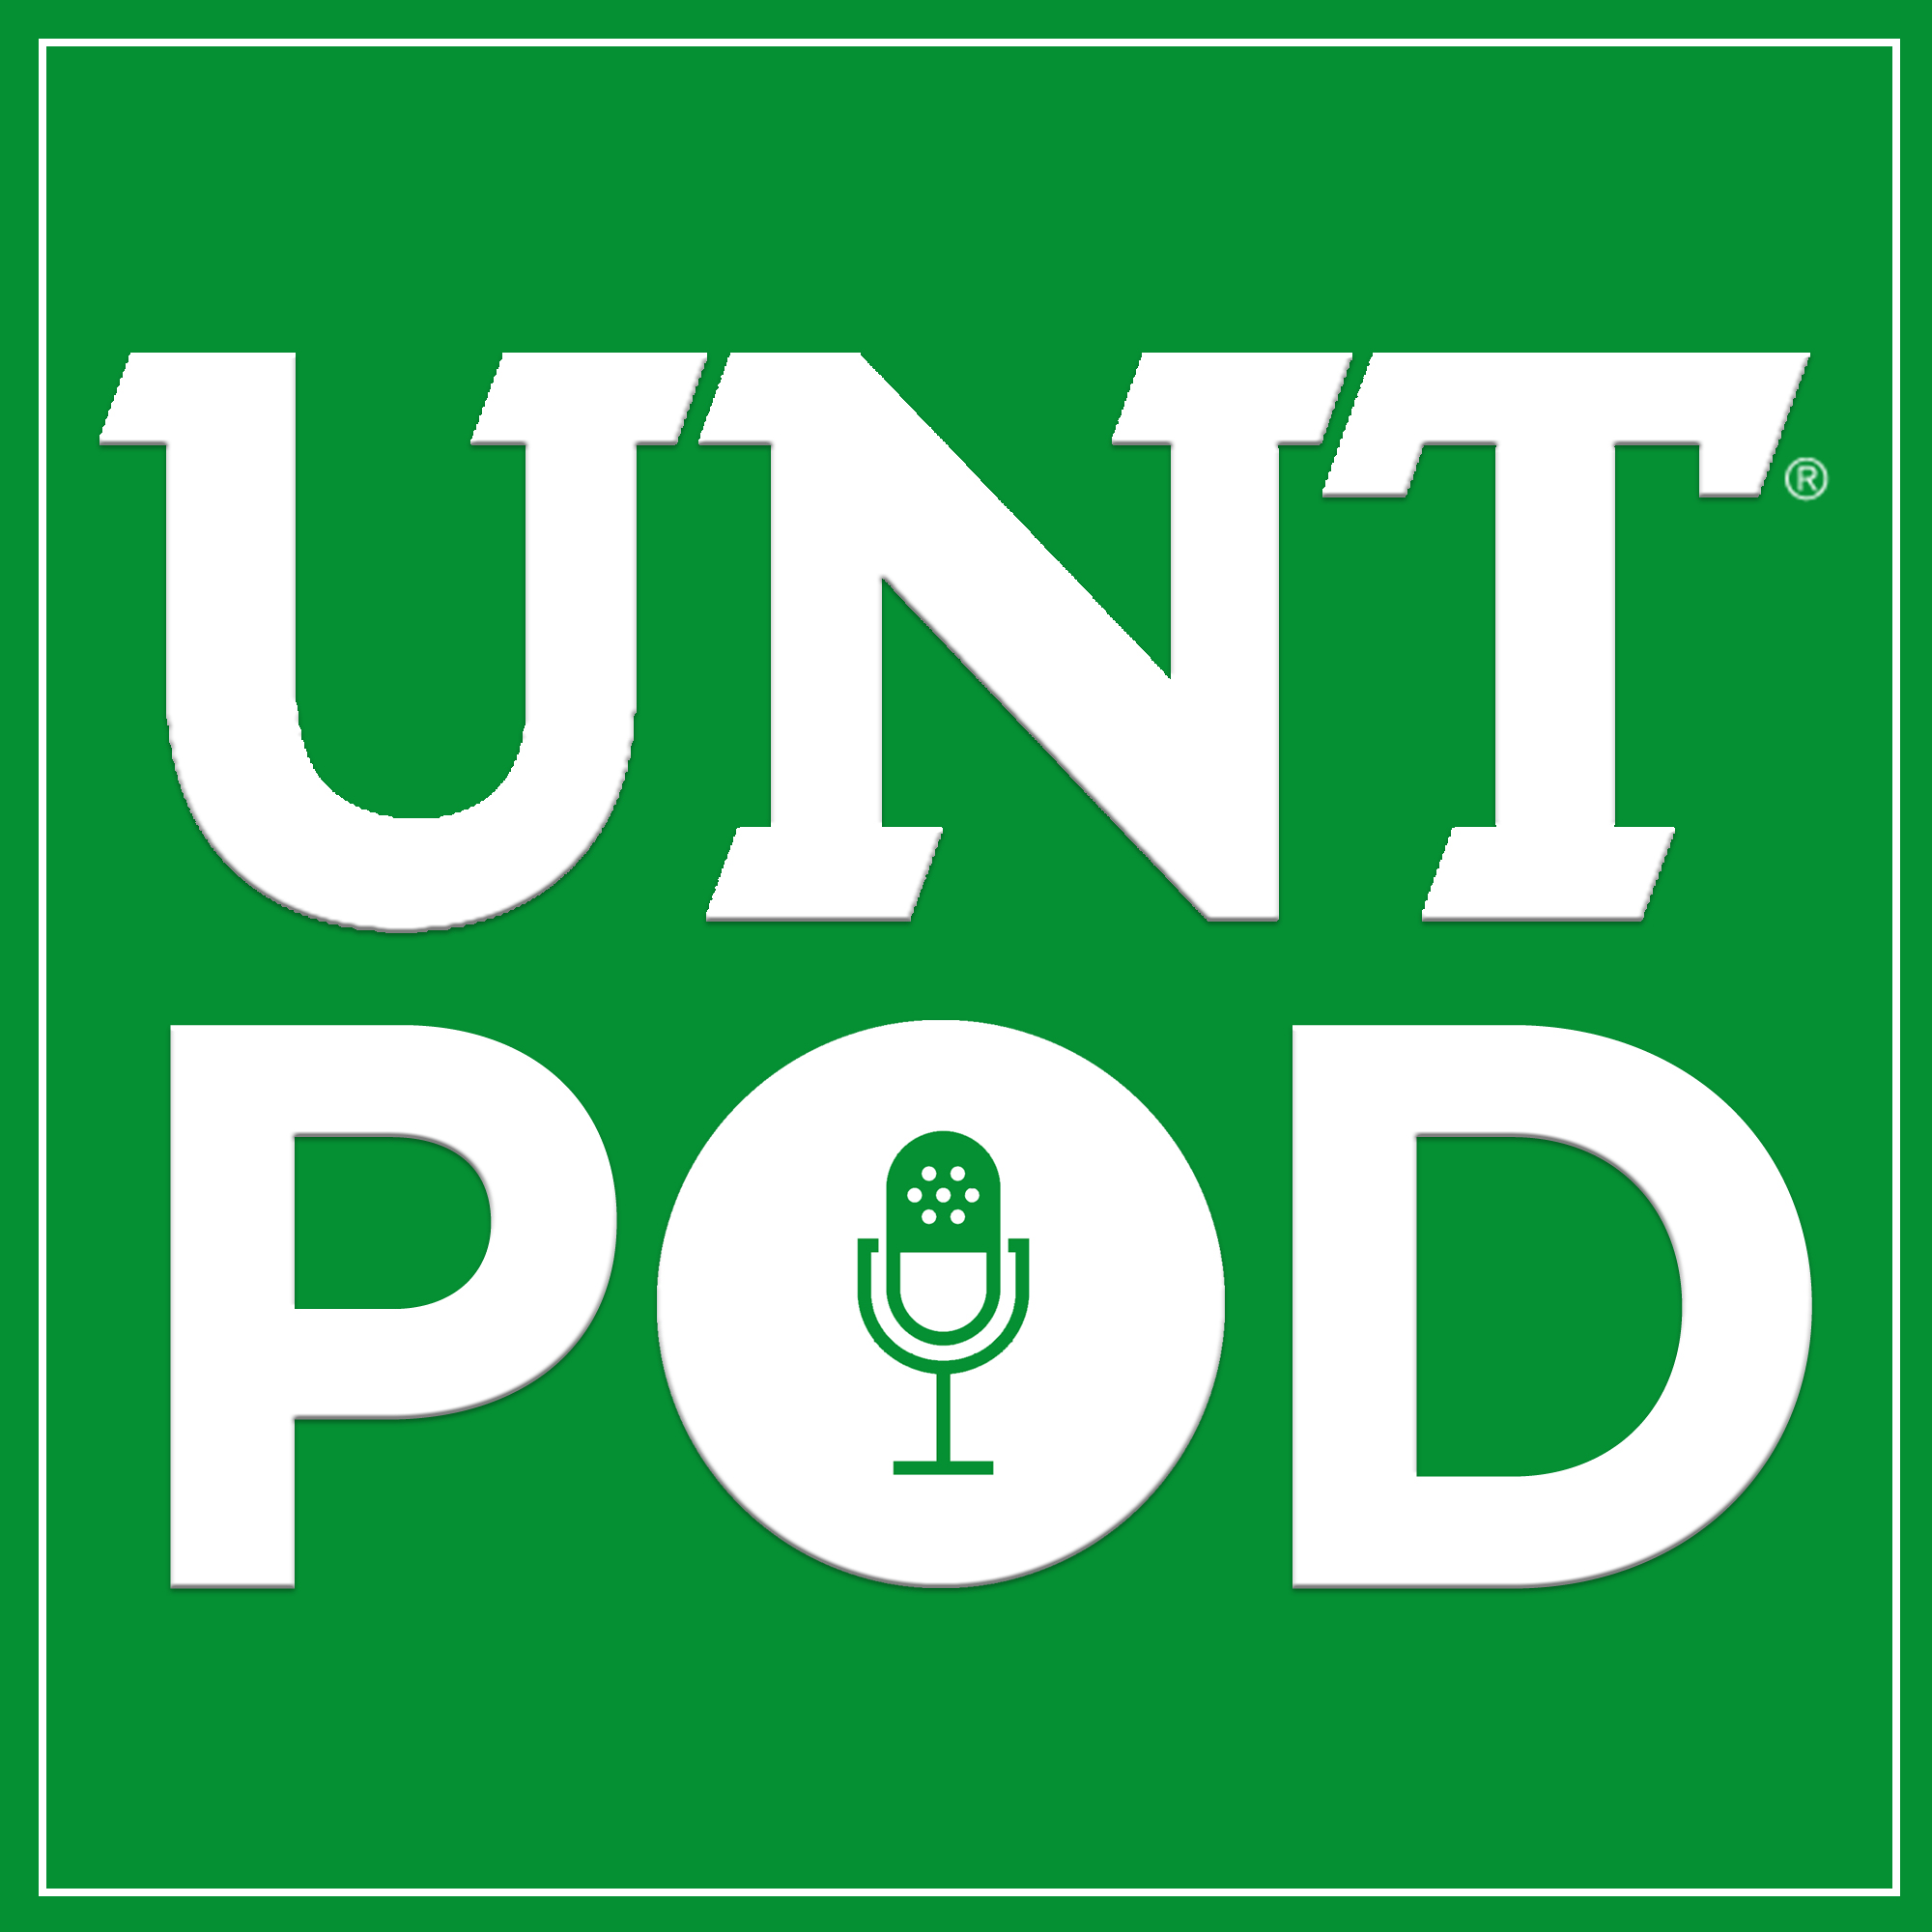 UNT POD: Faculty experts, students weigh in on Game of Thrones for new UNT podcast